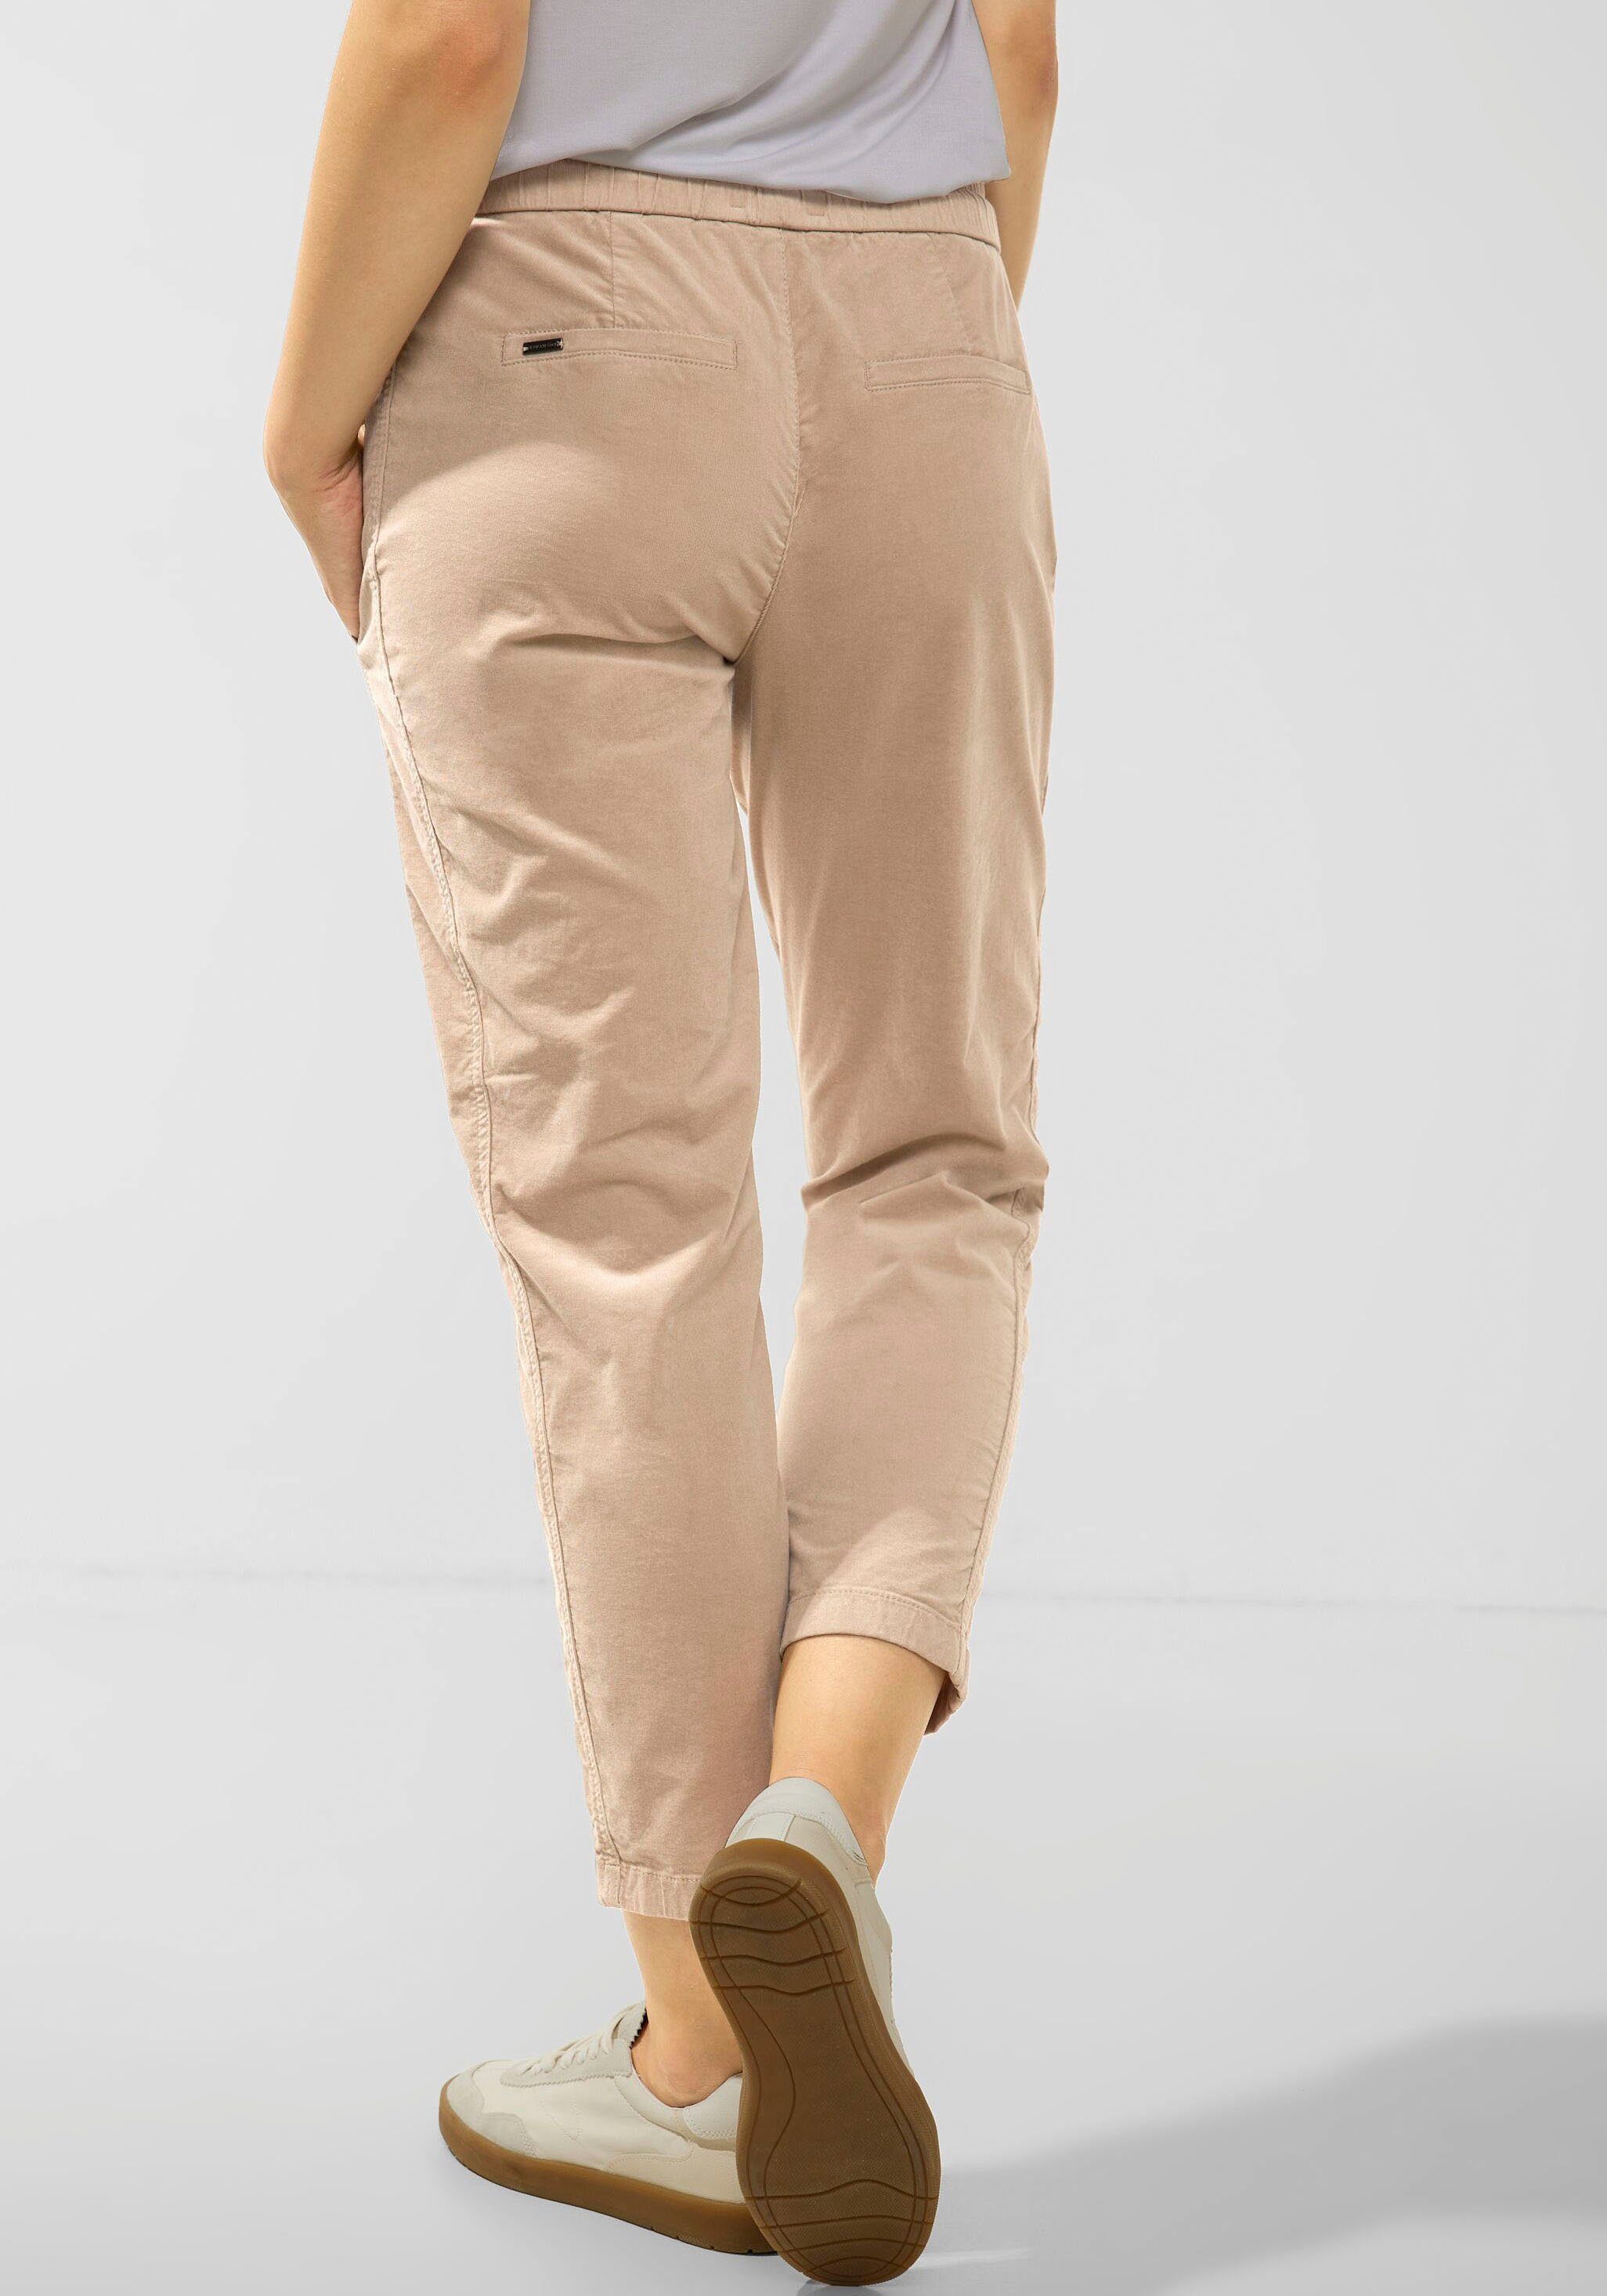 dull ONE Cordhose sand Metalllabel STREET mit bleached